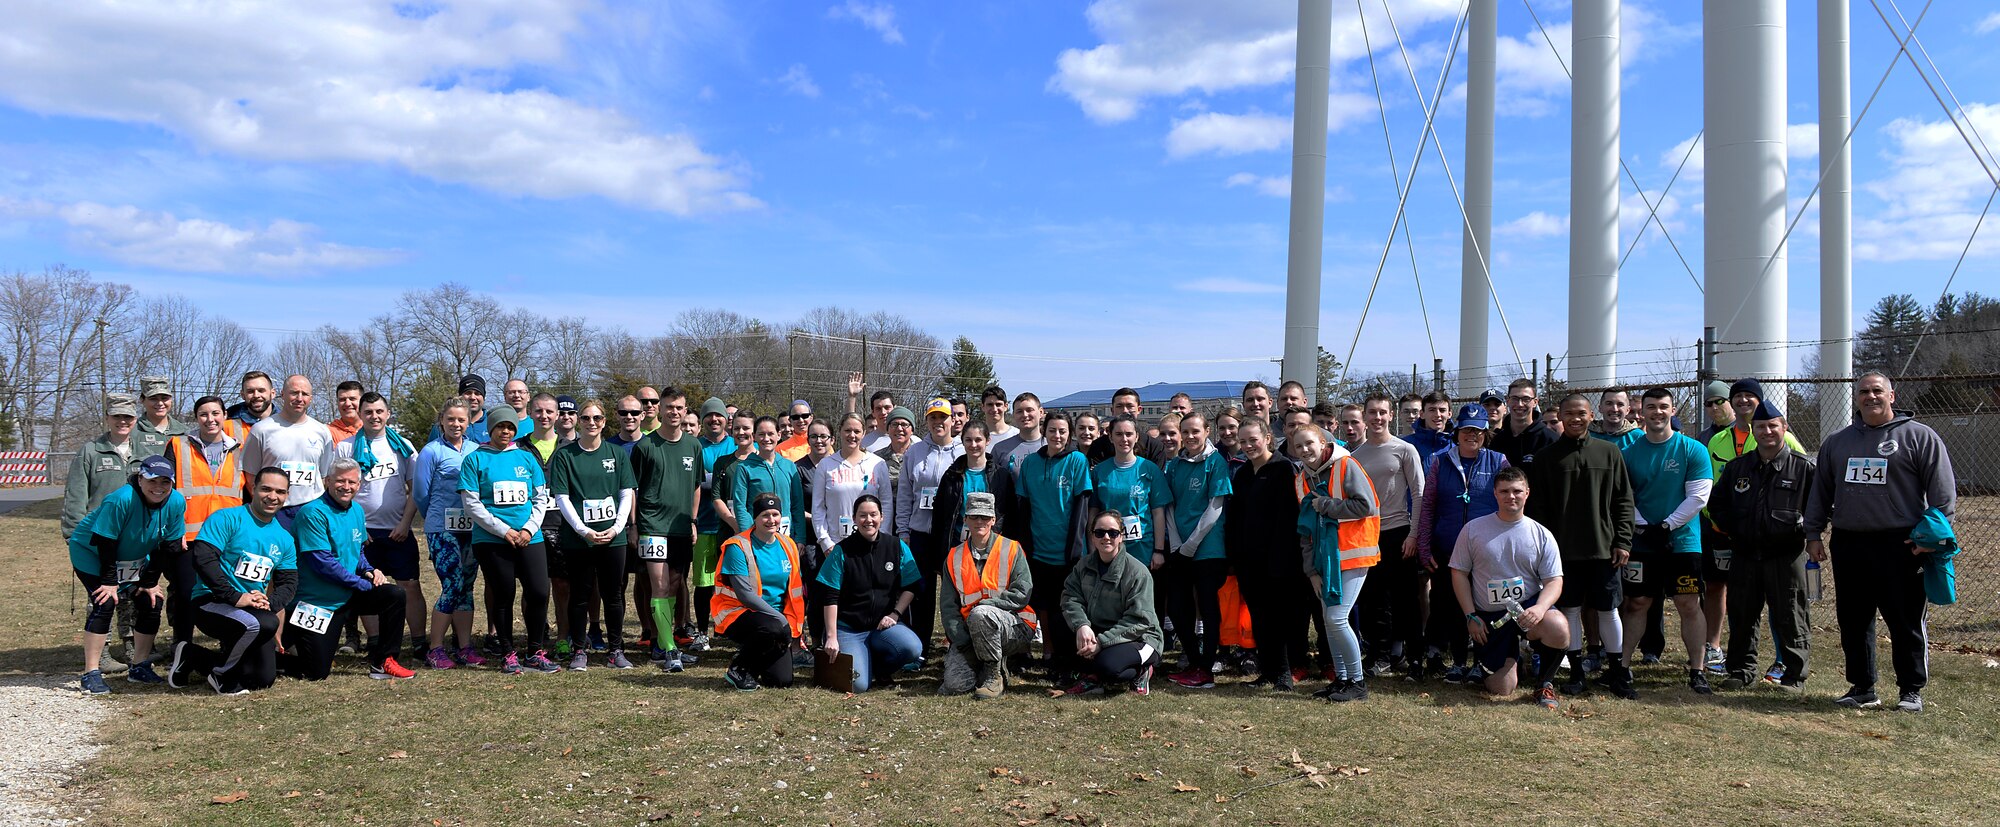 Participants in the Sexual Assault Awareness Month 5K run pose for a photo on April 08, 2018 at Pease Air National Guard Base, N.H. The Sexual Assault Prevention Response Team hosts the annual event. (N.H. Air National Guard photo by Airman 1st Class Victoria Nelson)